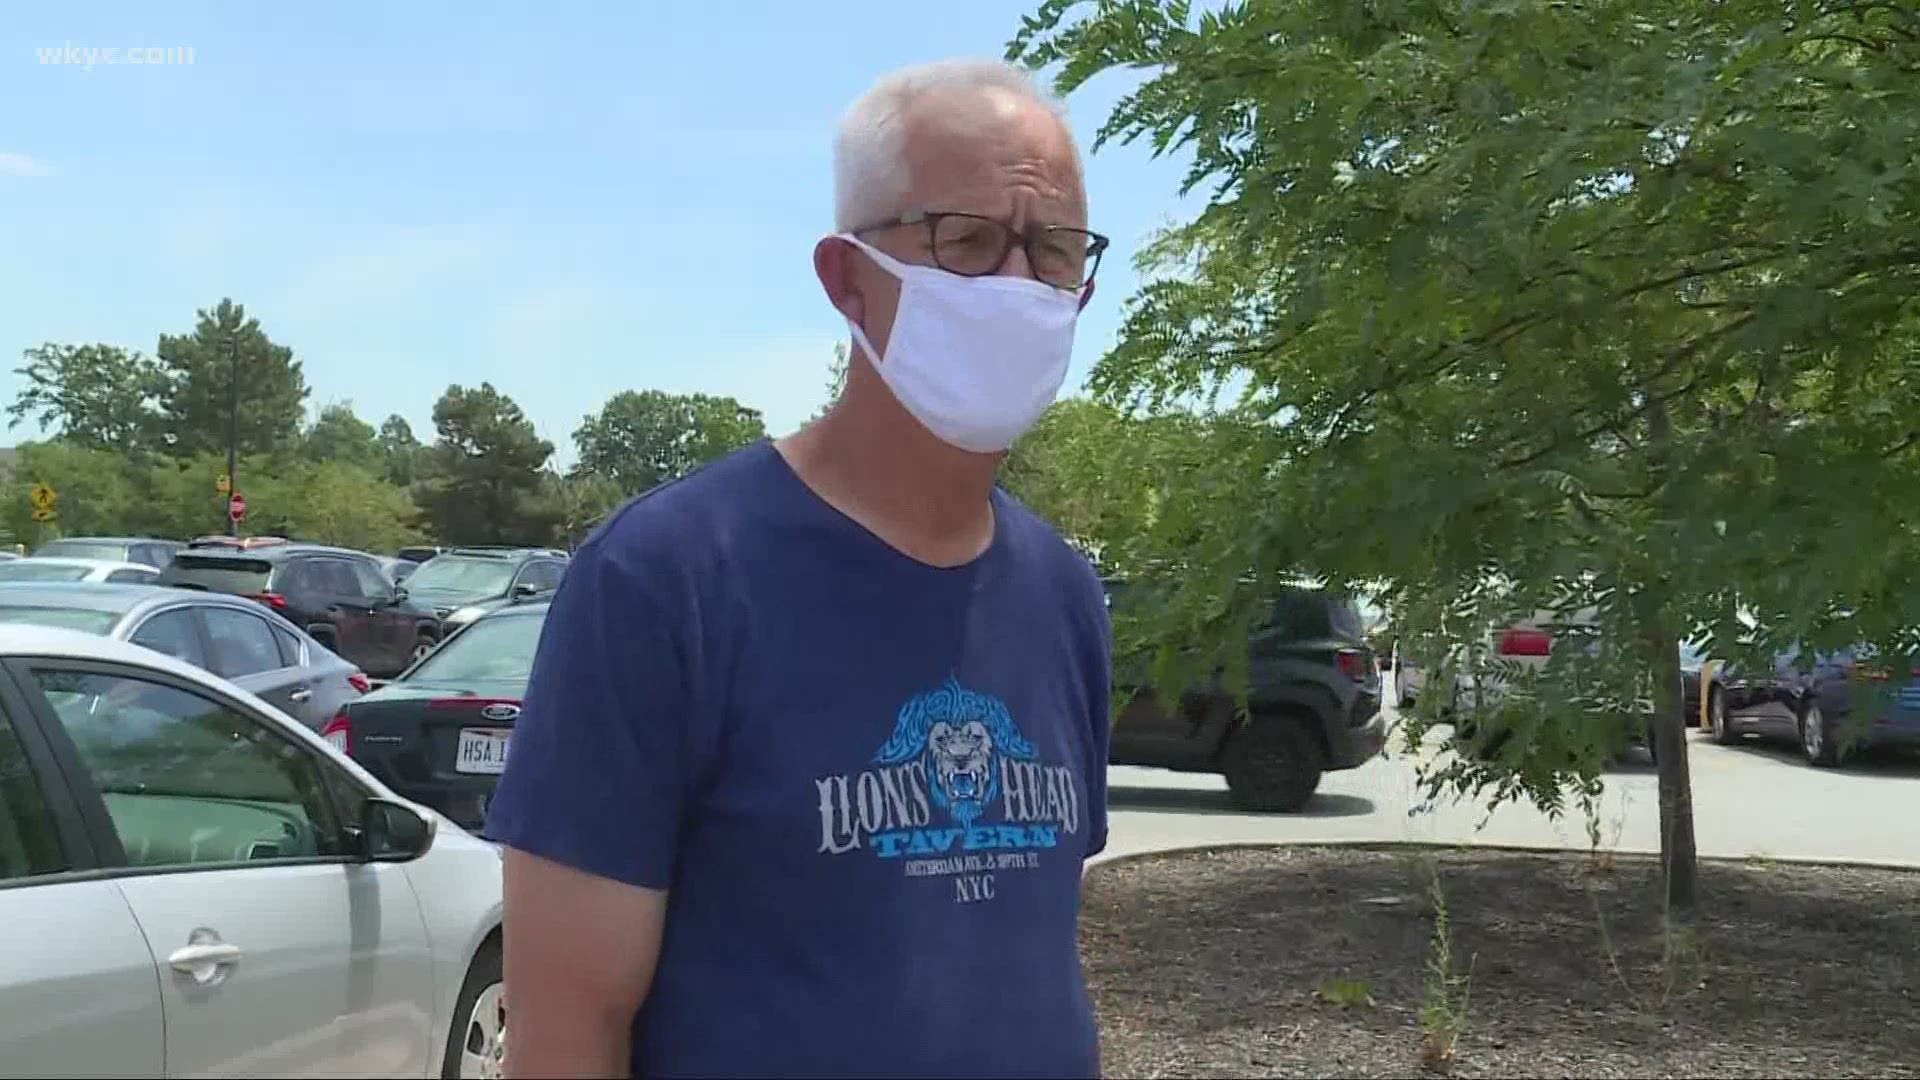 The list of businesses and restaurants requiring customers to wear masks or face coverings is growing. Lindsay Buckingham has the reaction of local shoppers.